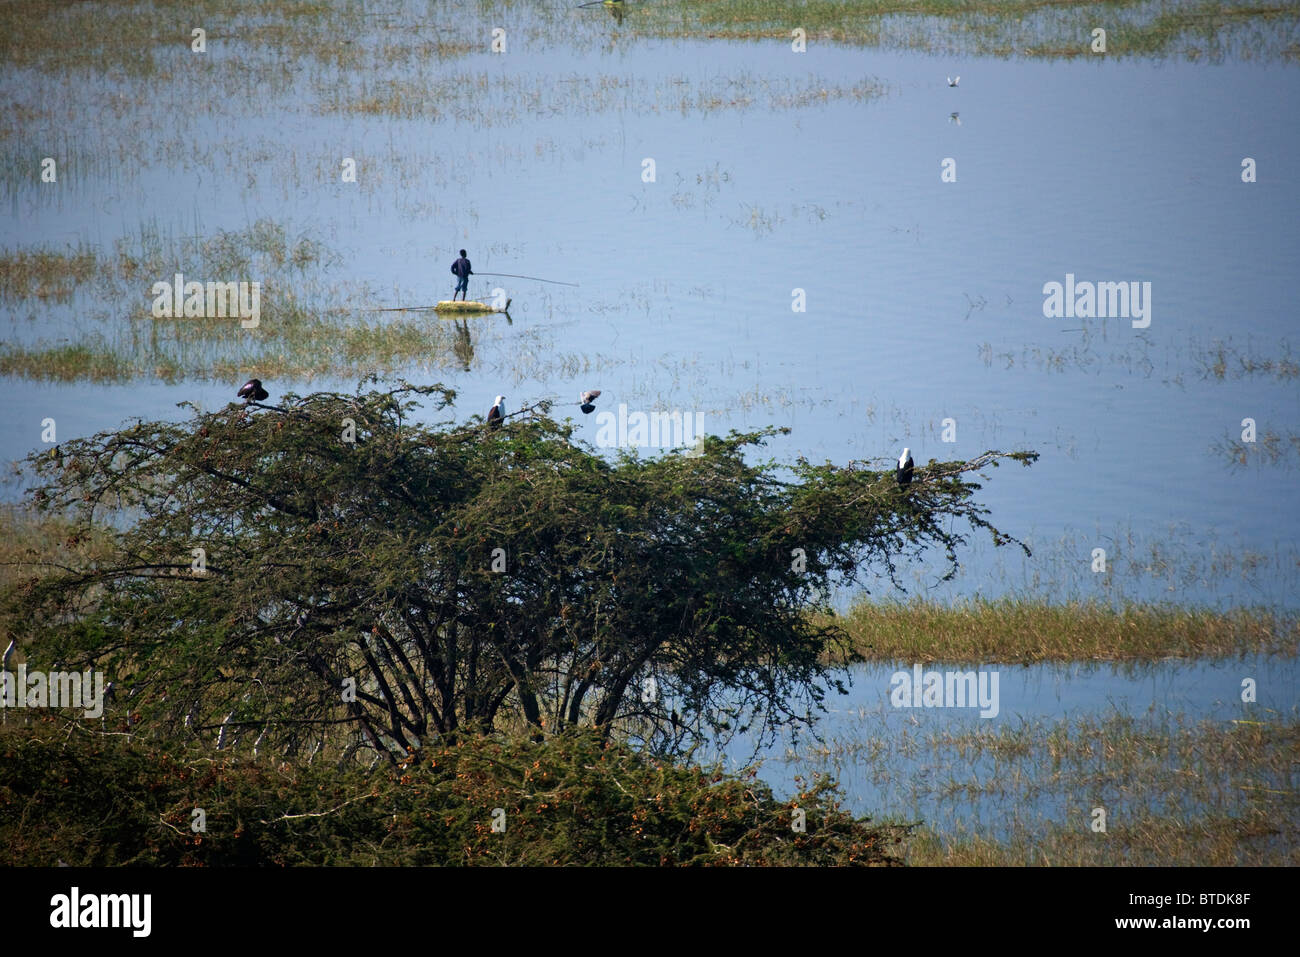 A scenic view of Lake Awassa with a fisherman on papyrus raft and fish eagles perched on a tree in the foreground Stock Photo